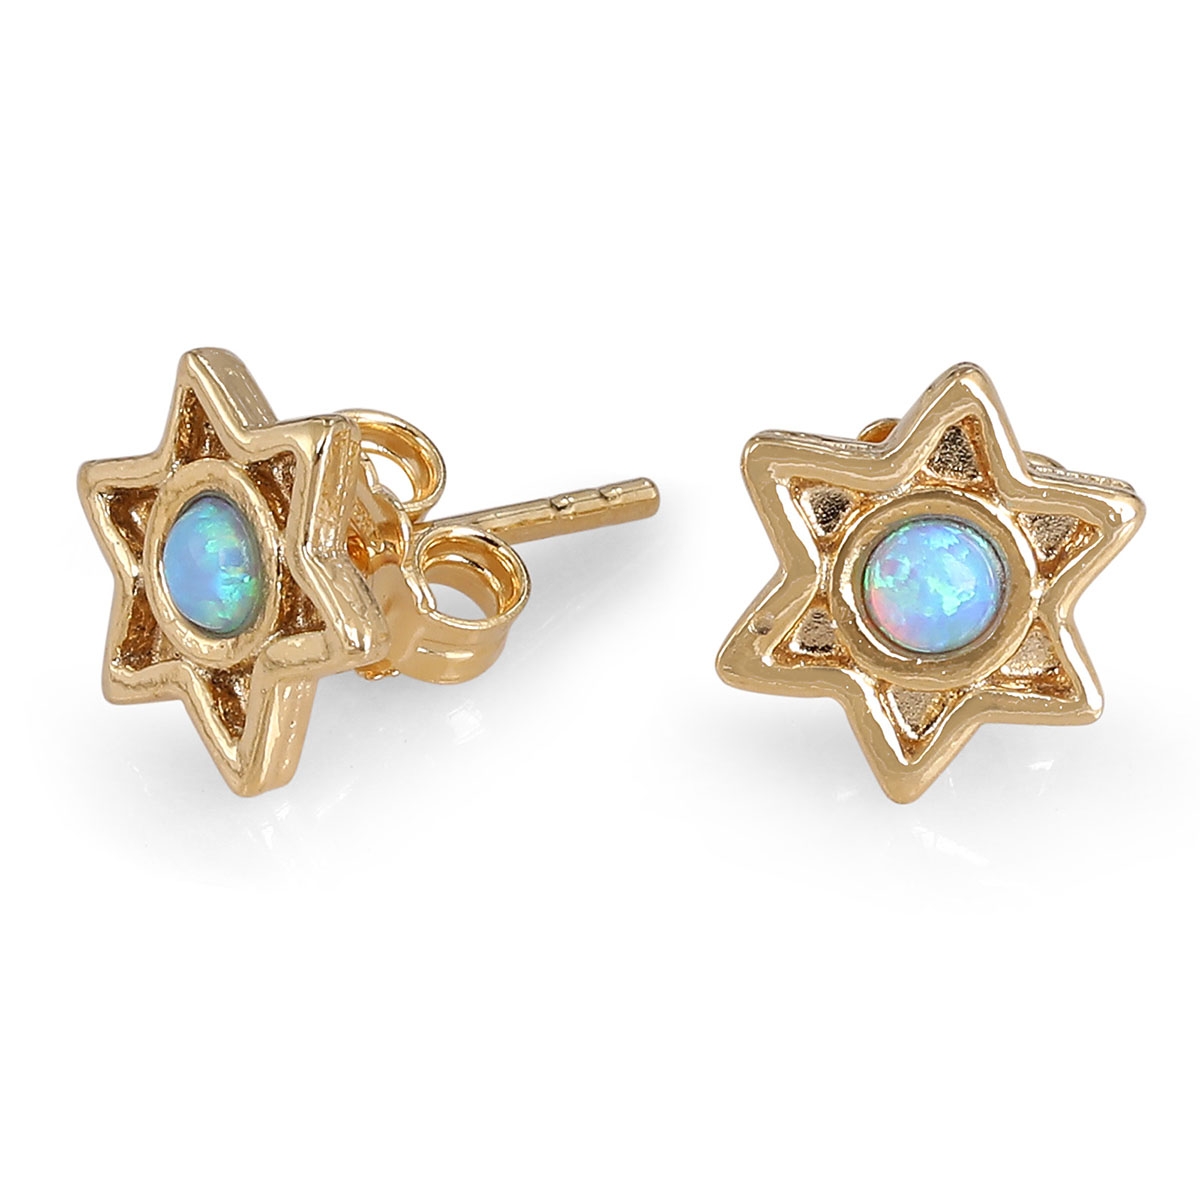 Gold-Plated Star of David Earrings With Opal Stones - 1